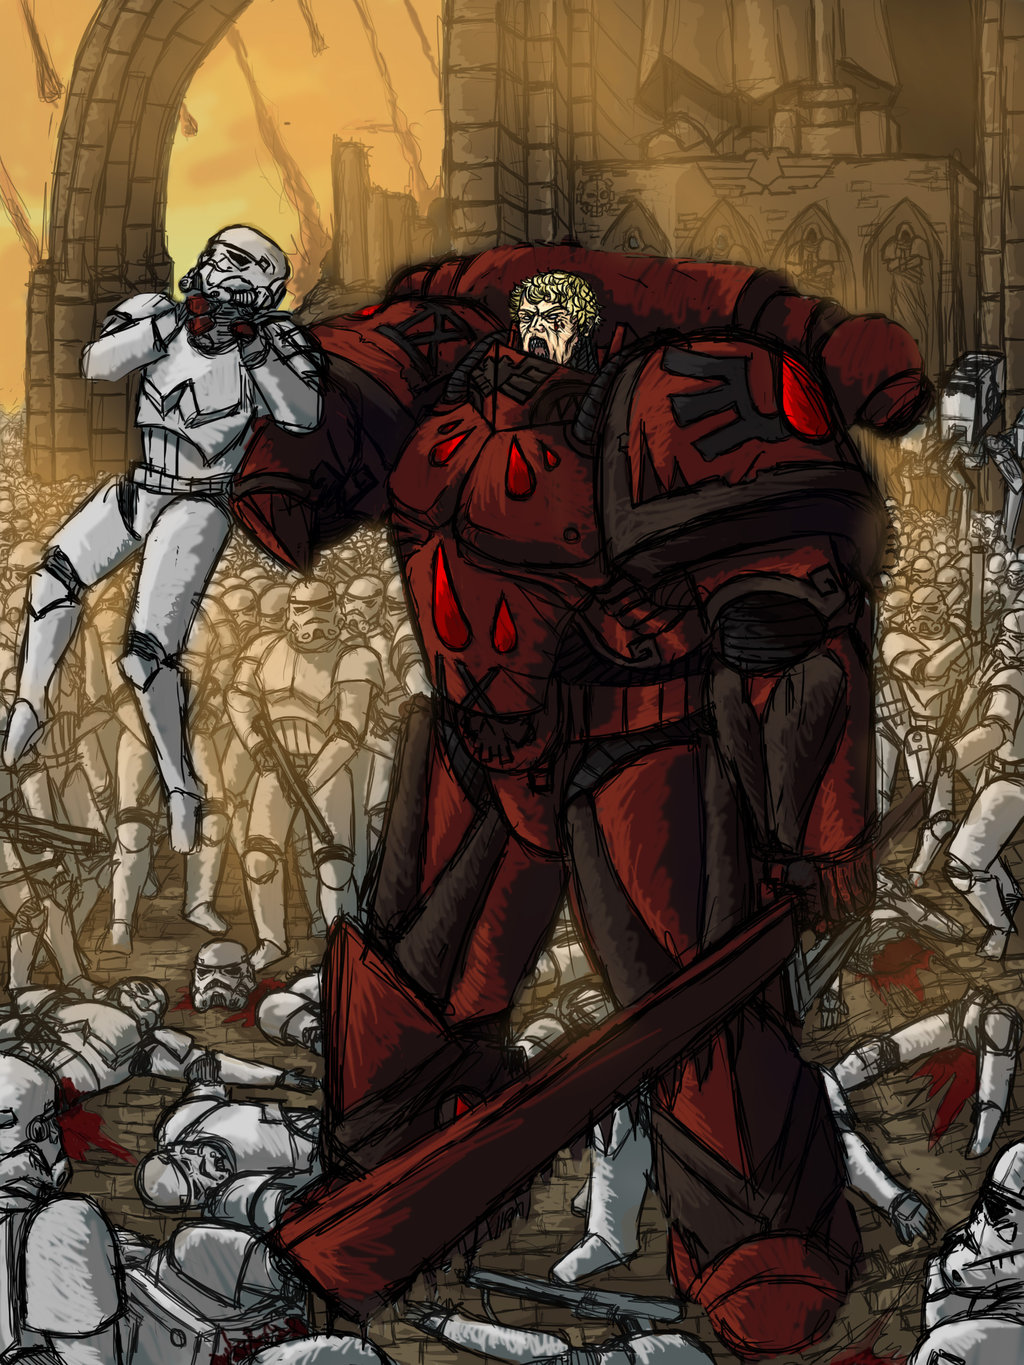 Wheres your Emperor now? image - Warhammer 40K Fan Group - Mod DB